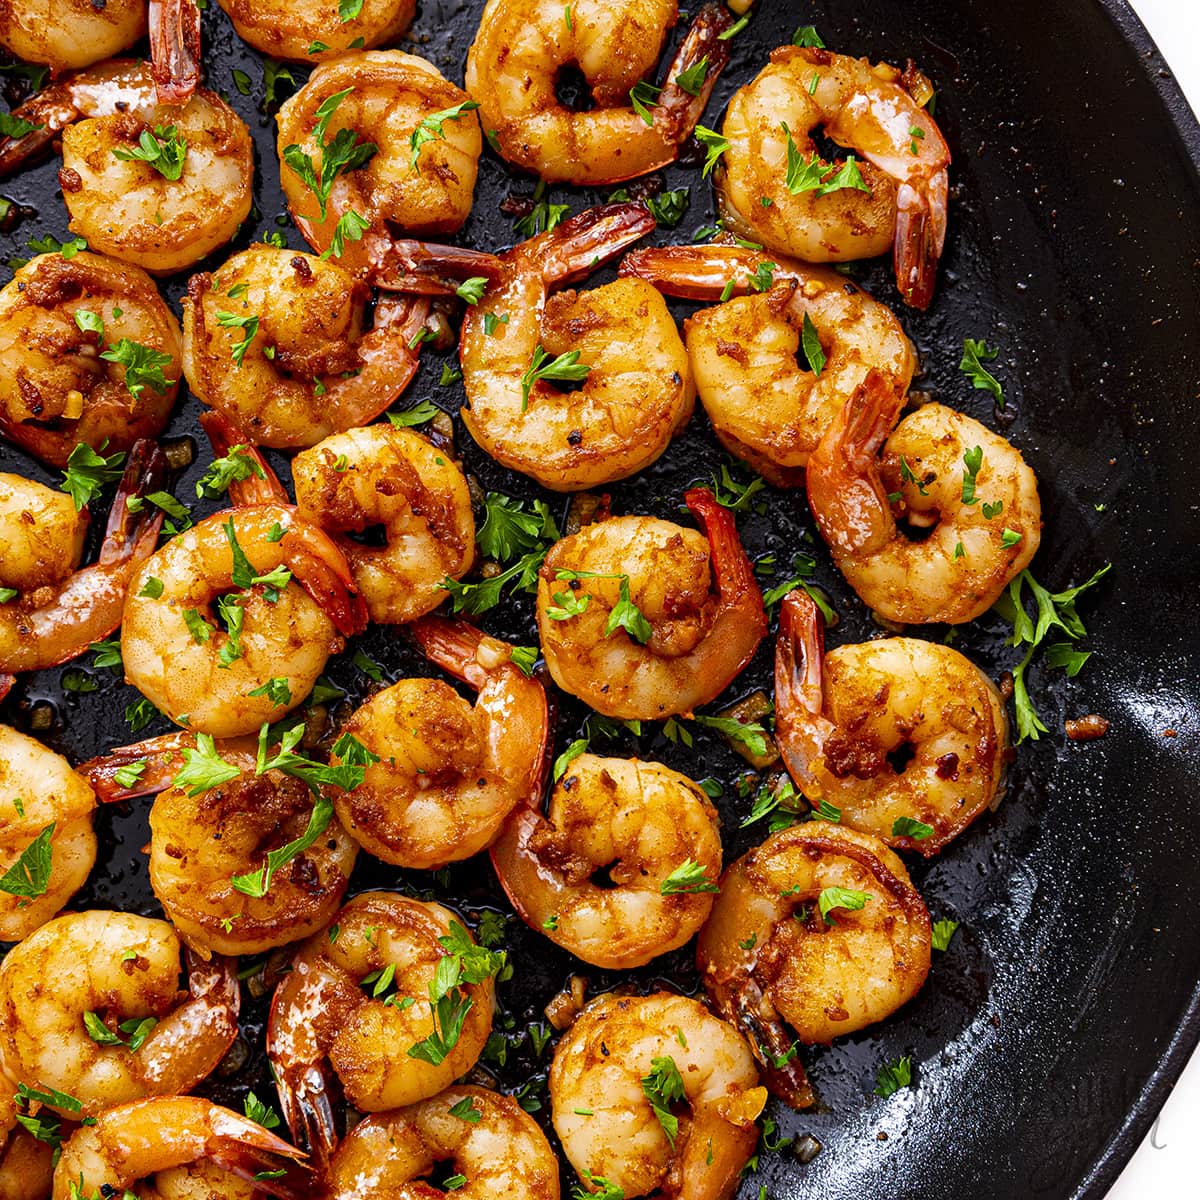 Finished sauteed shrimp in a skillet.